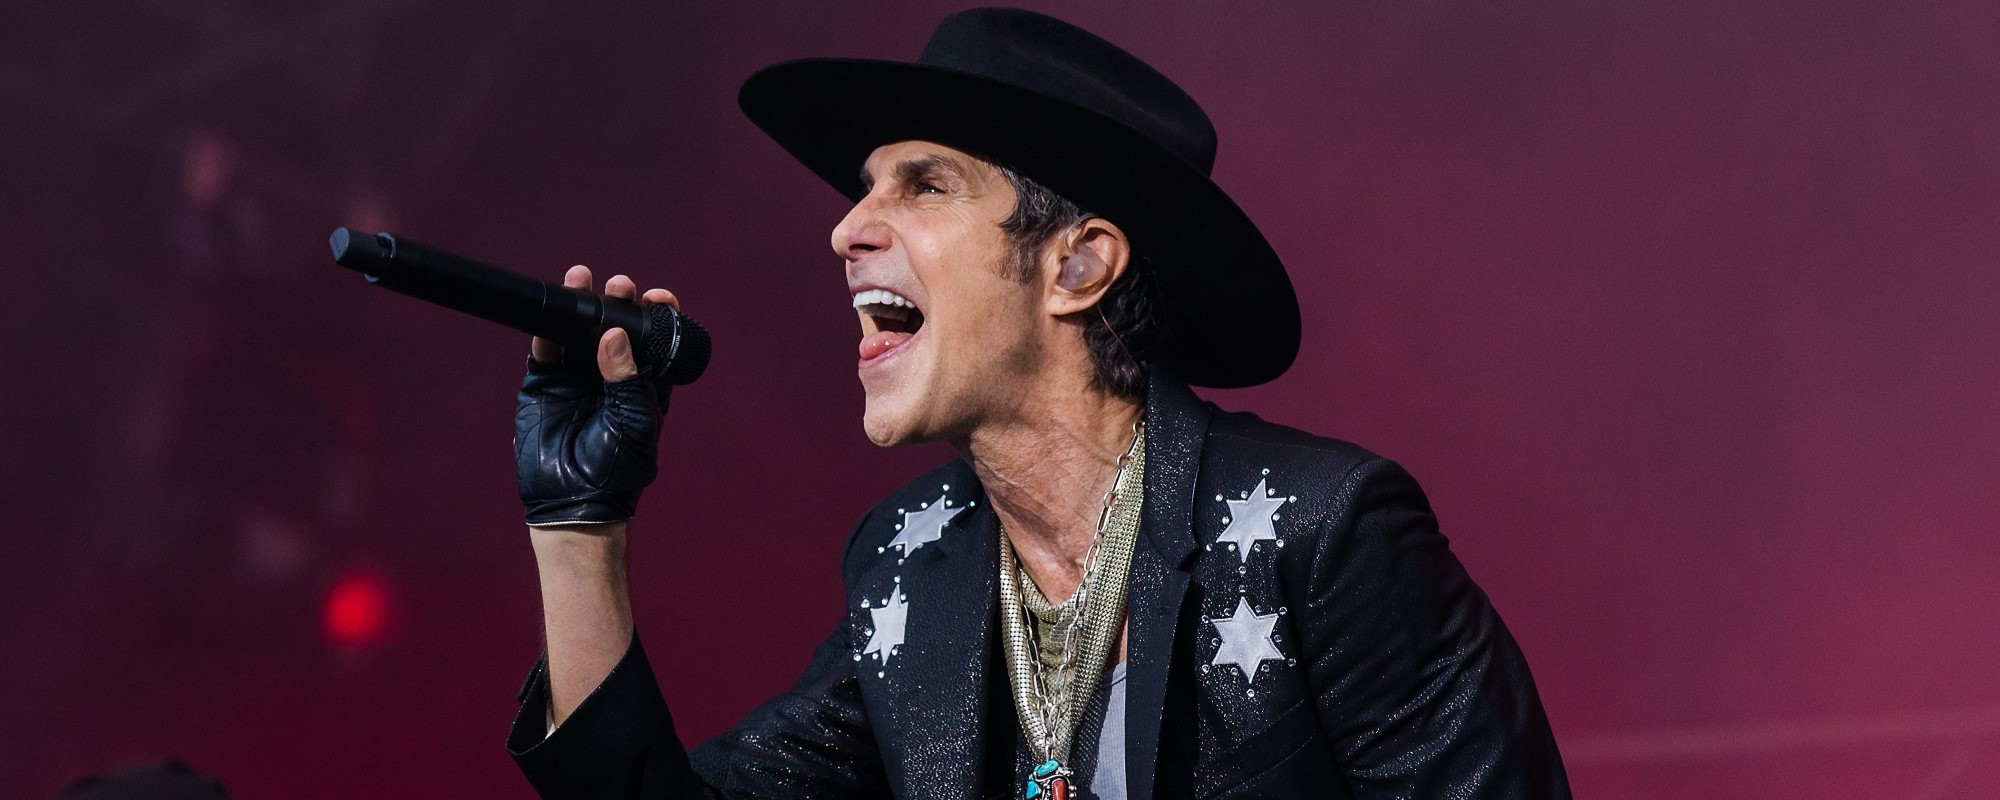 5 Fascinating Facts About Perry Farrell in Honor of the Jane’s Addiction Singer’s 65th Birthday